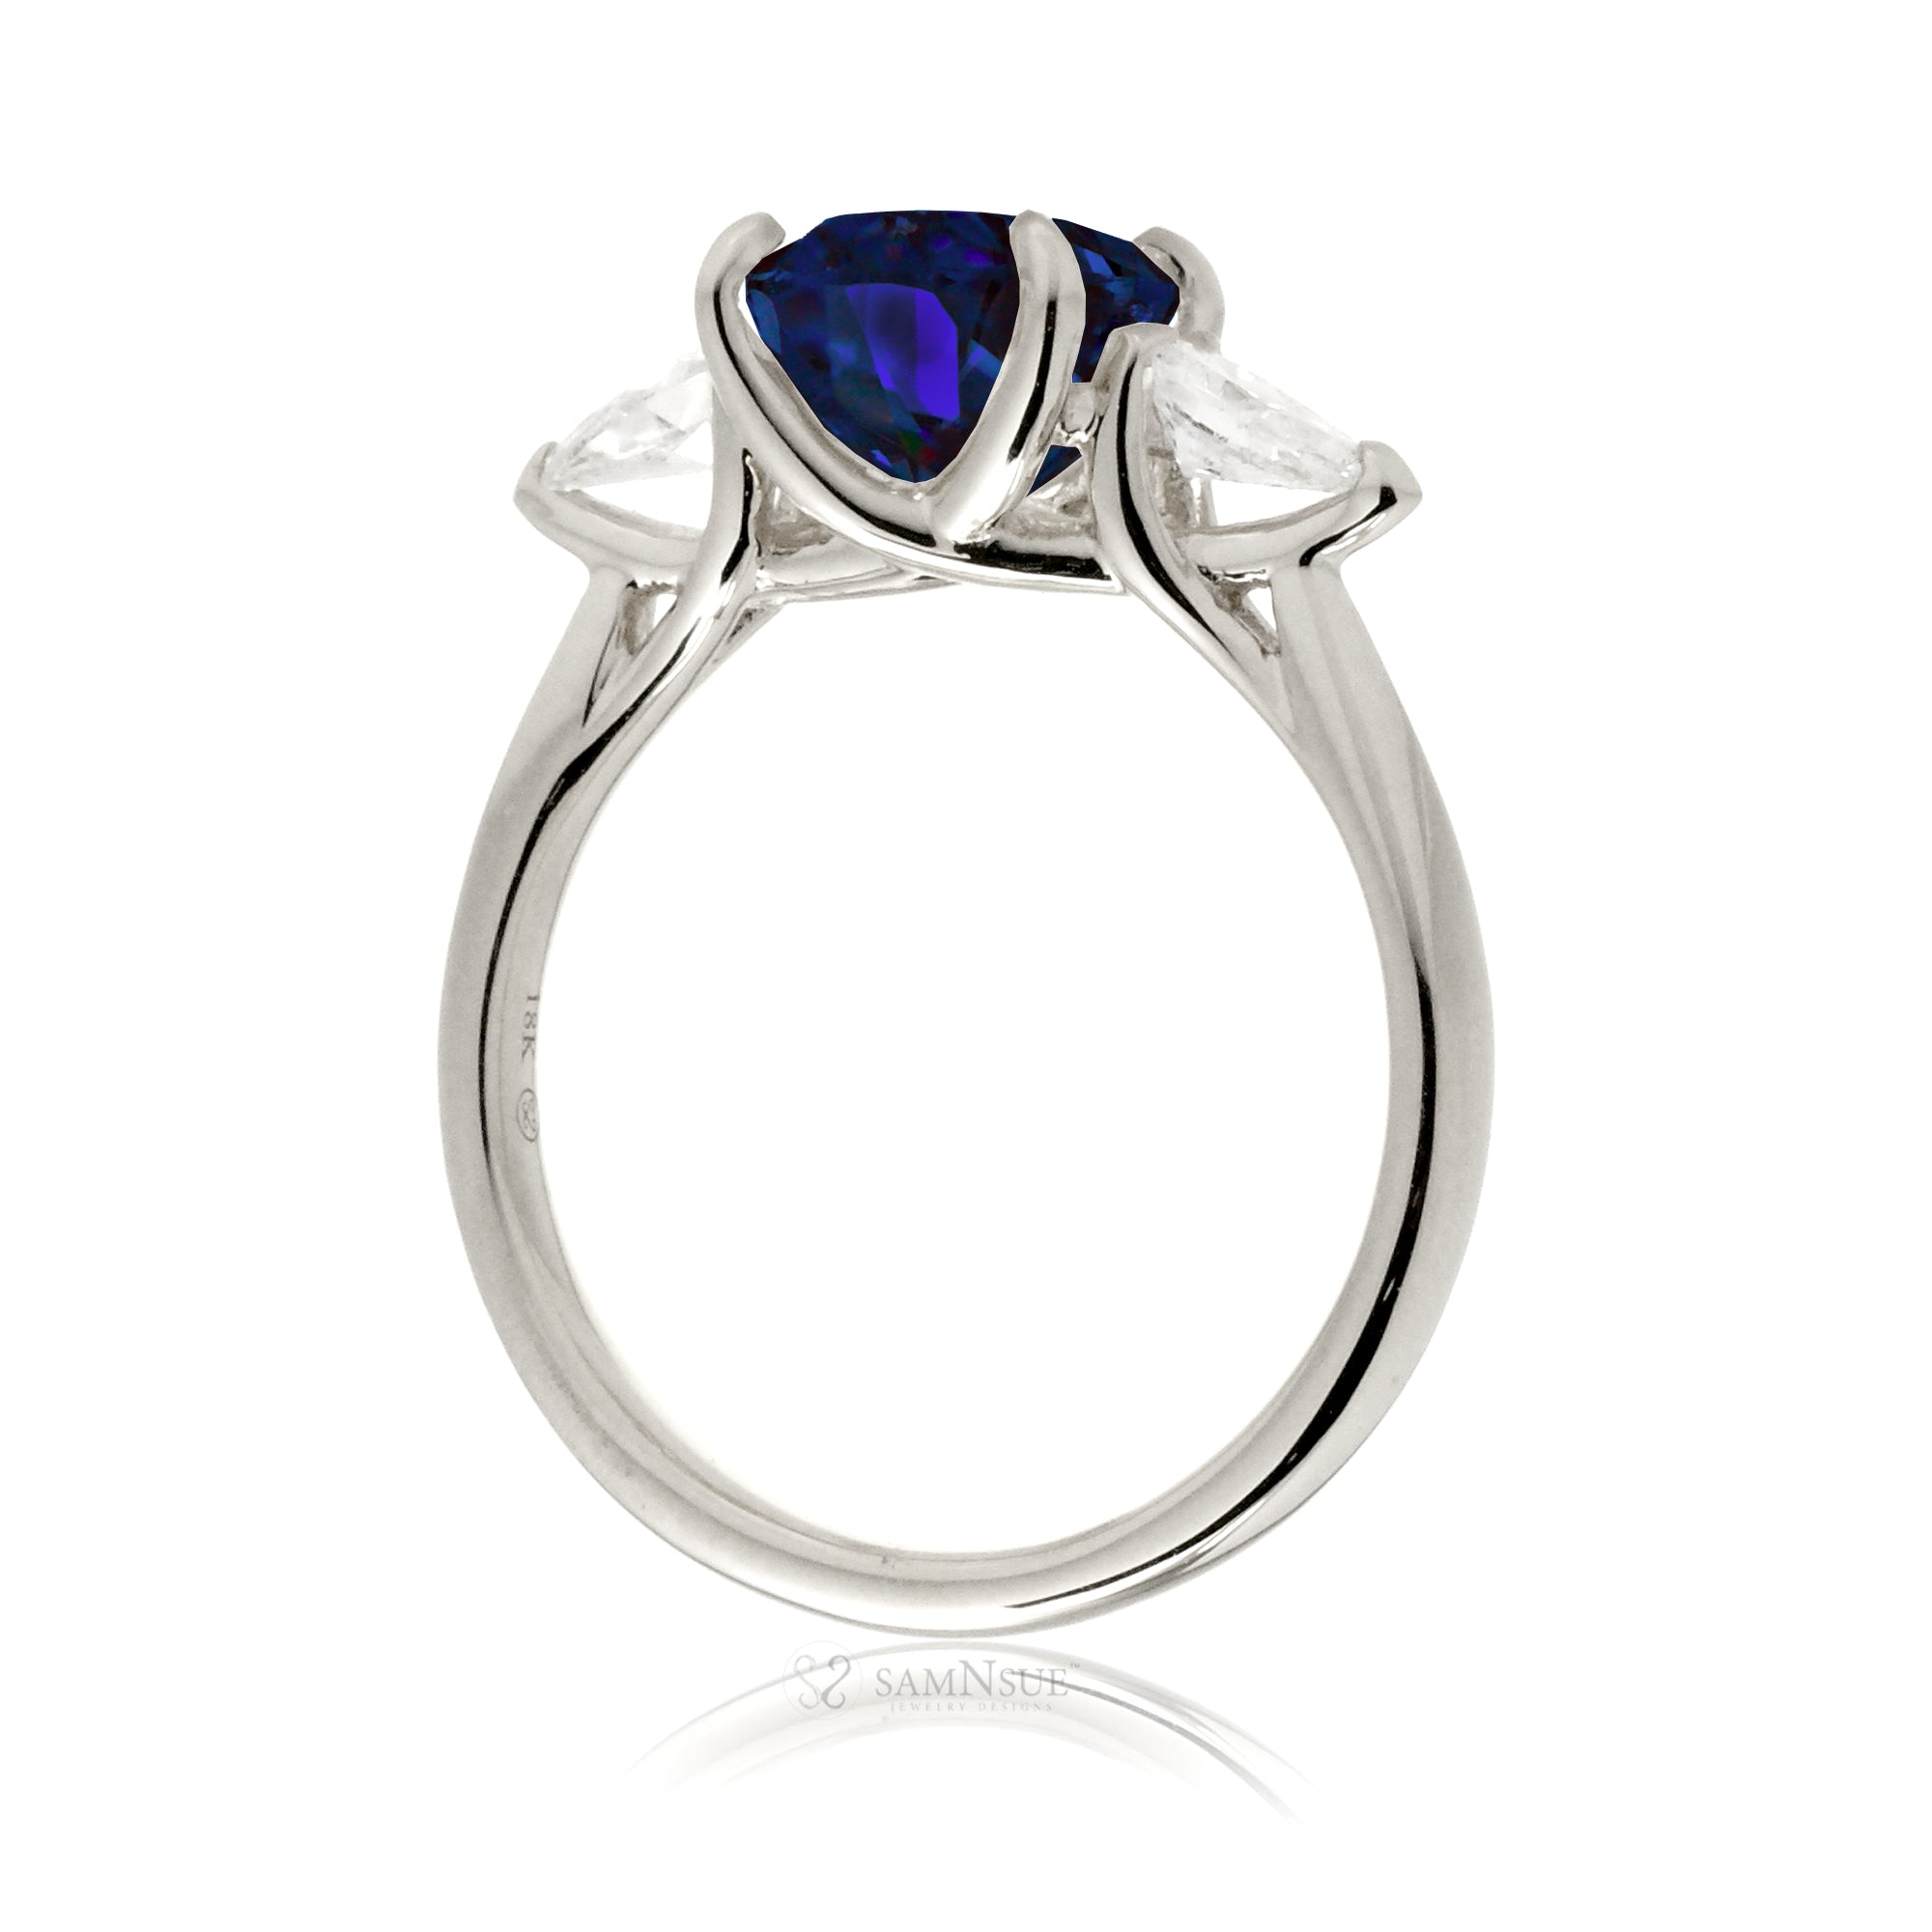 Oval sapphire pear diamond ring white gold